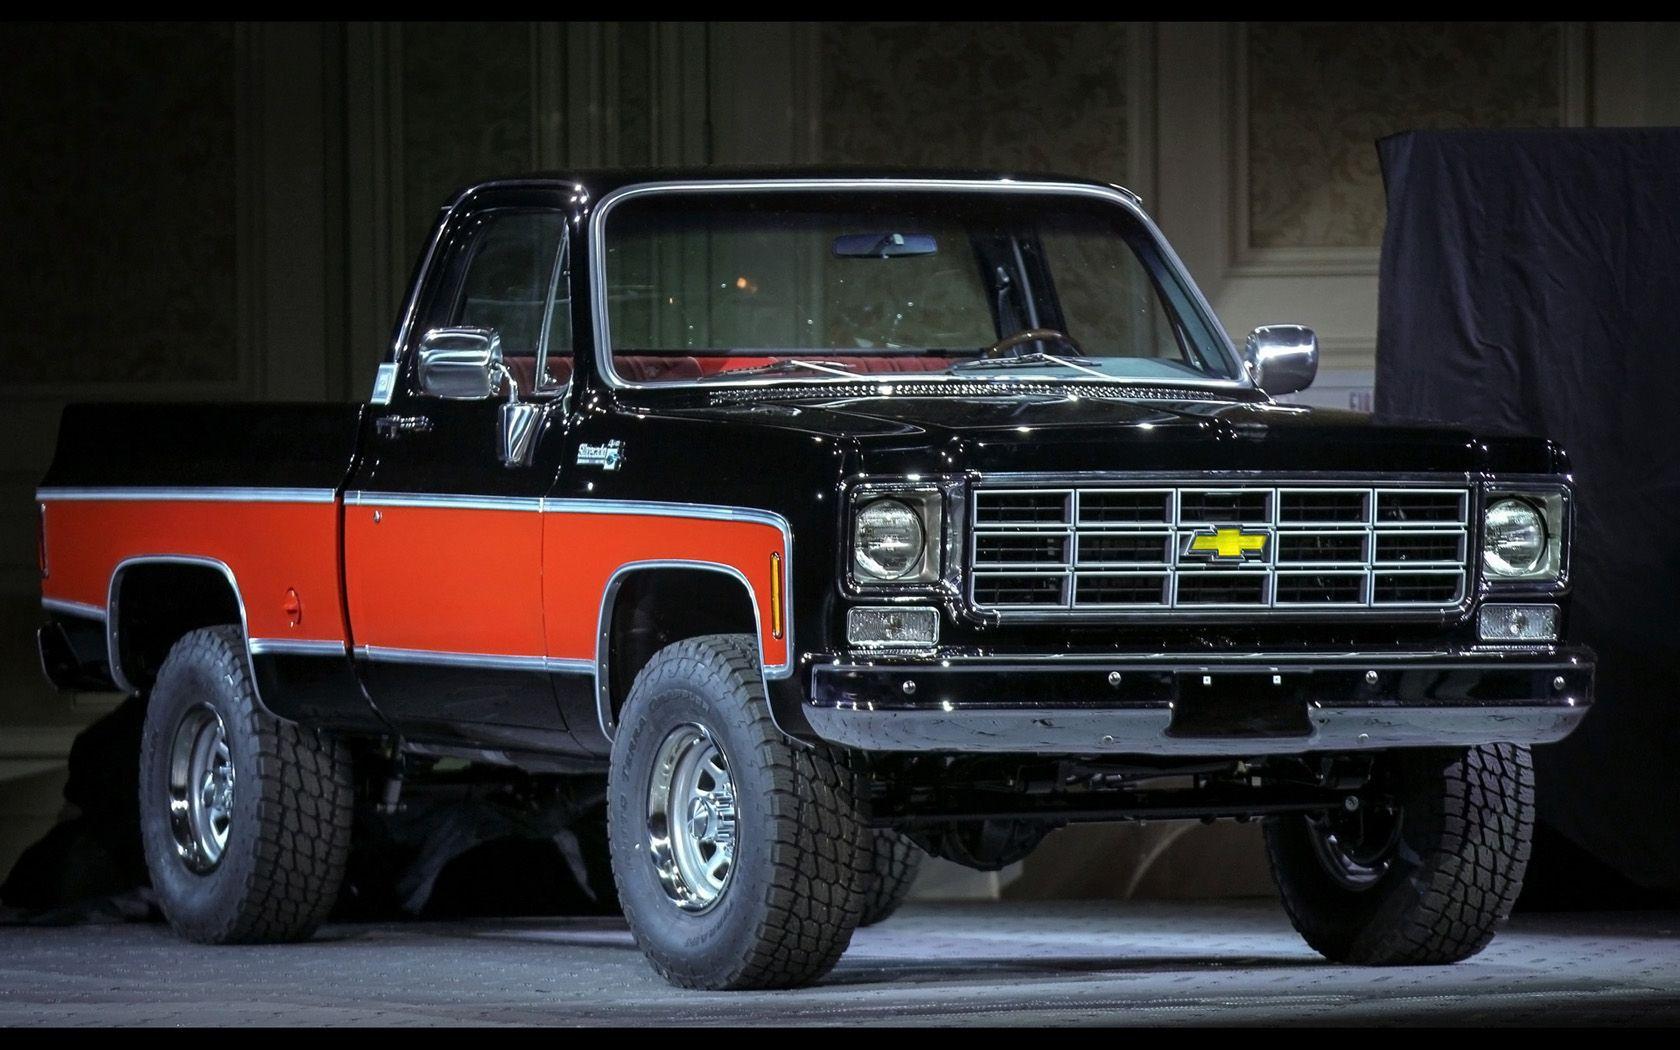 1970 Chevy Truck Wallpapers - Wallpaper Cave